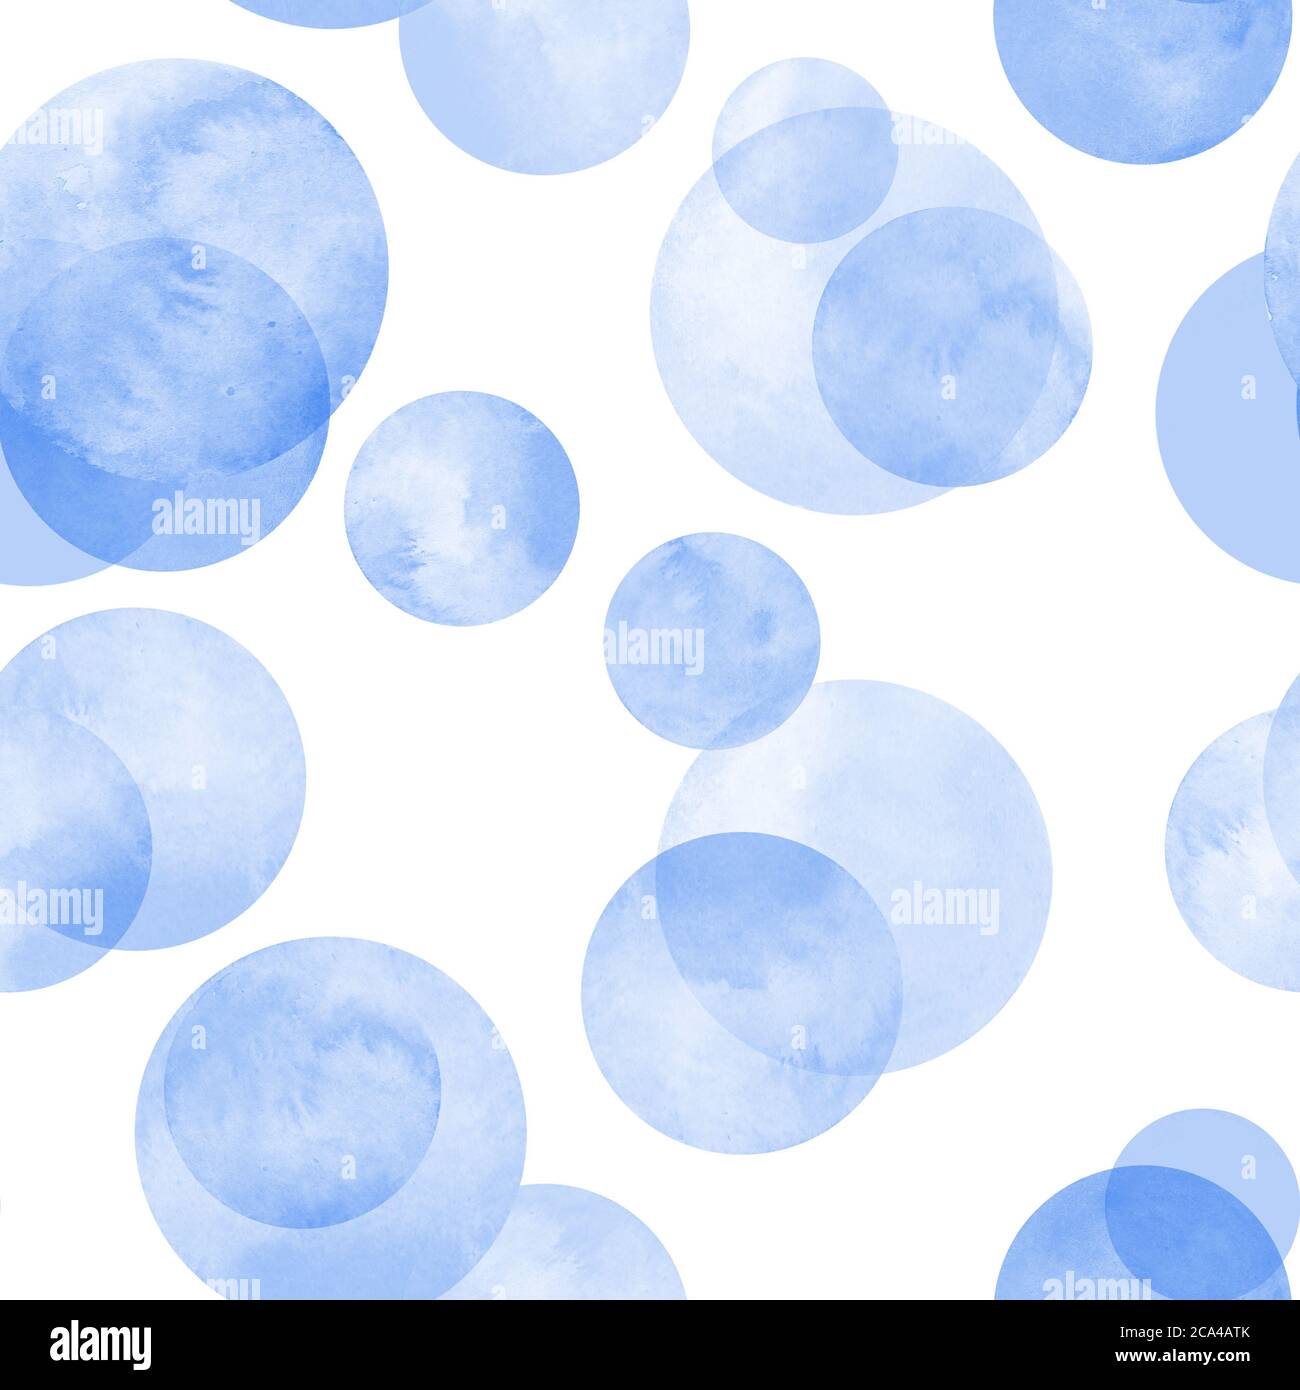 Circles blue navy indigo watercolor seamless pattern. Abstract watercolour background with color circles on white. Hand drawn round shaped texture. Pr Stock Photo